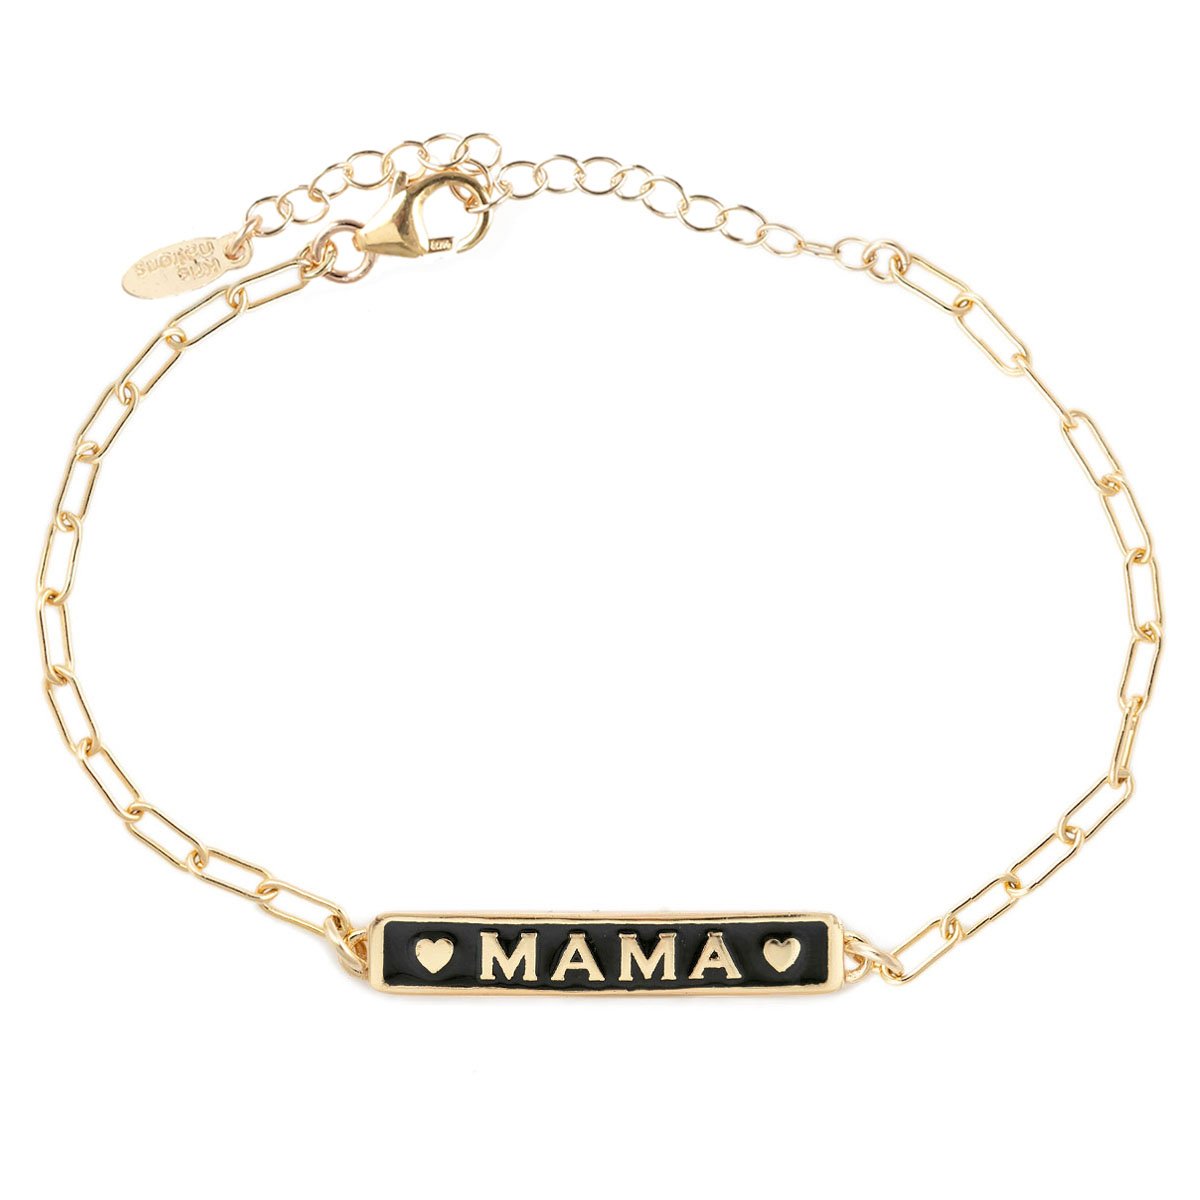 Mama Enamel Bracelet with Drawn Cable Chain